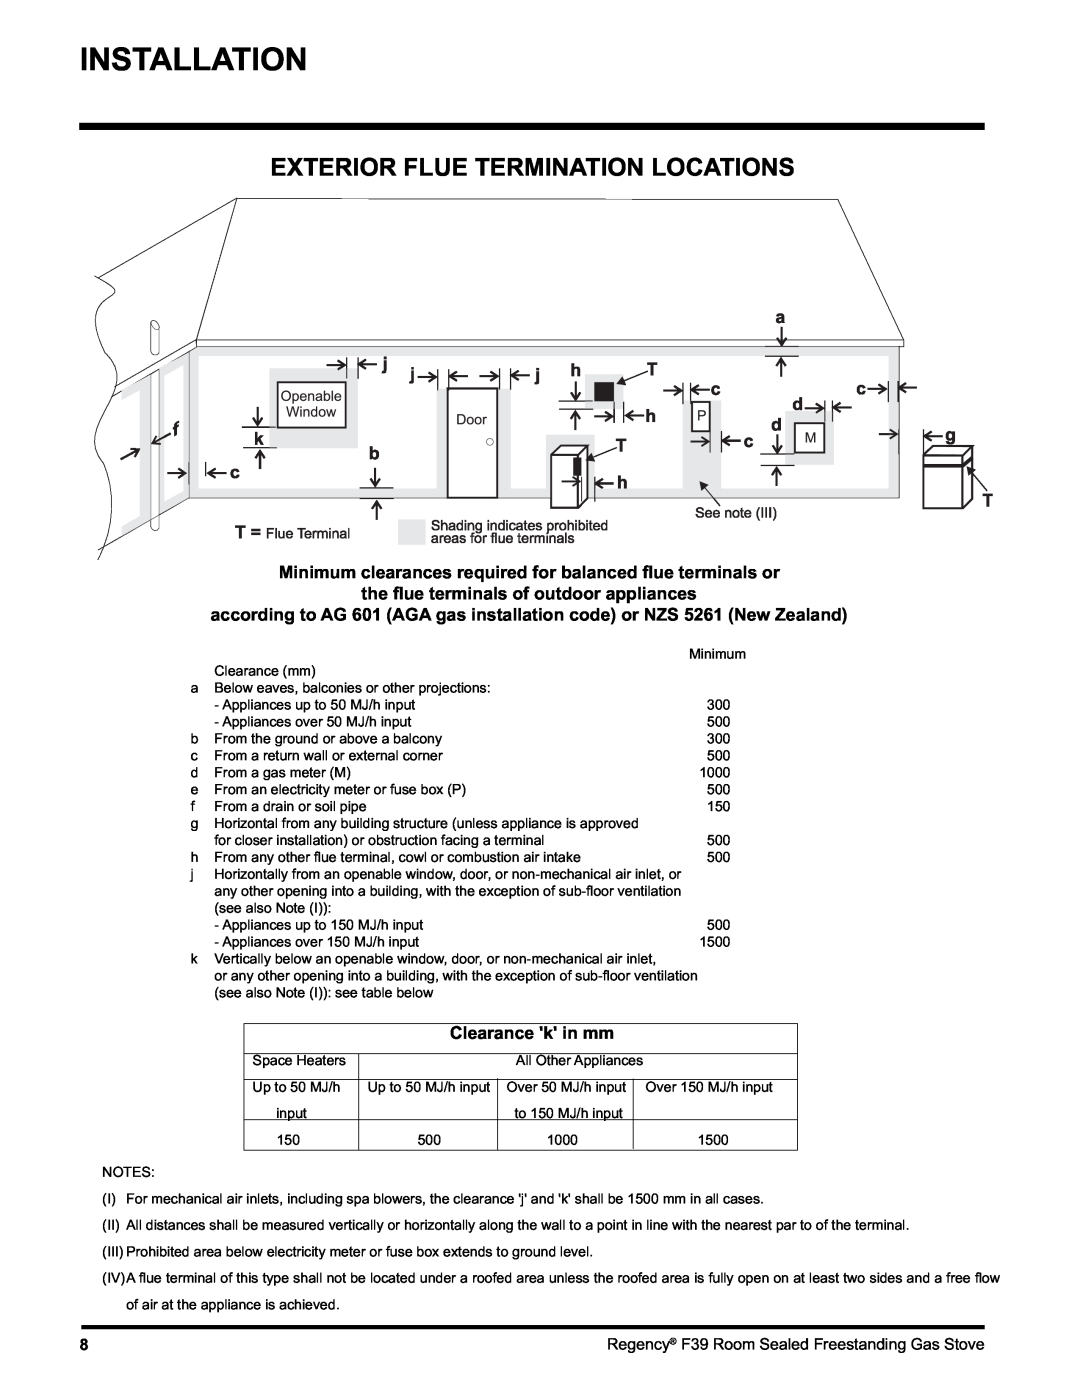 Regency F39-NG, F39-LPG Exterior Flue Termination Locations, the ﬂue terminals of outdoor appliances, Clearance k in mm 